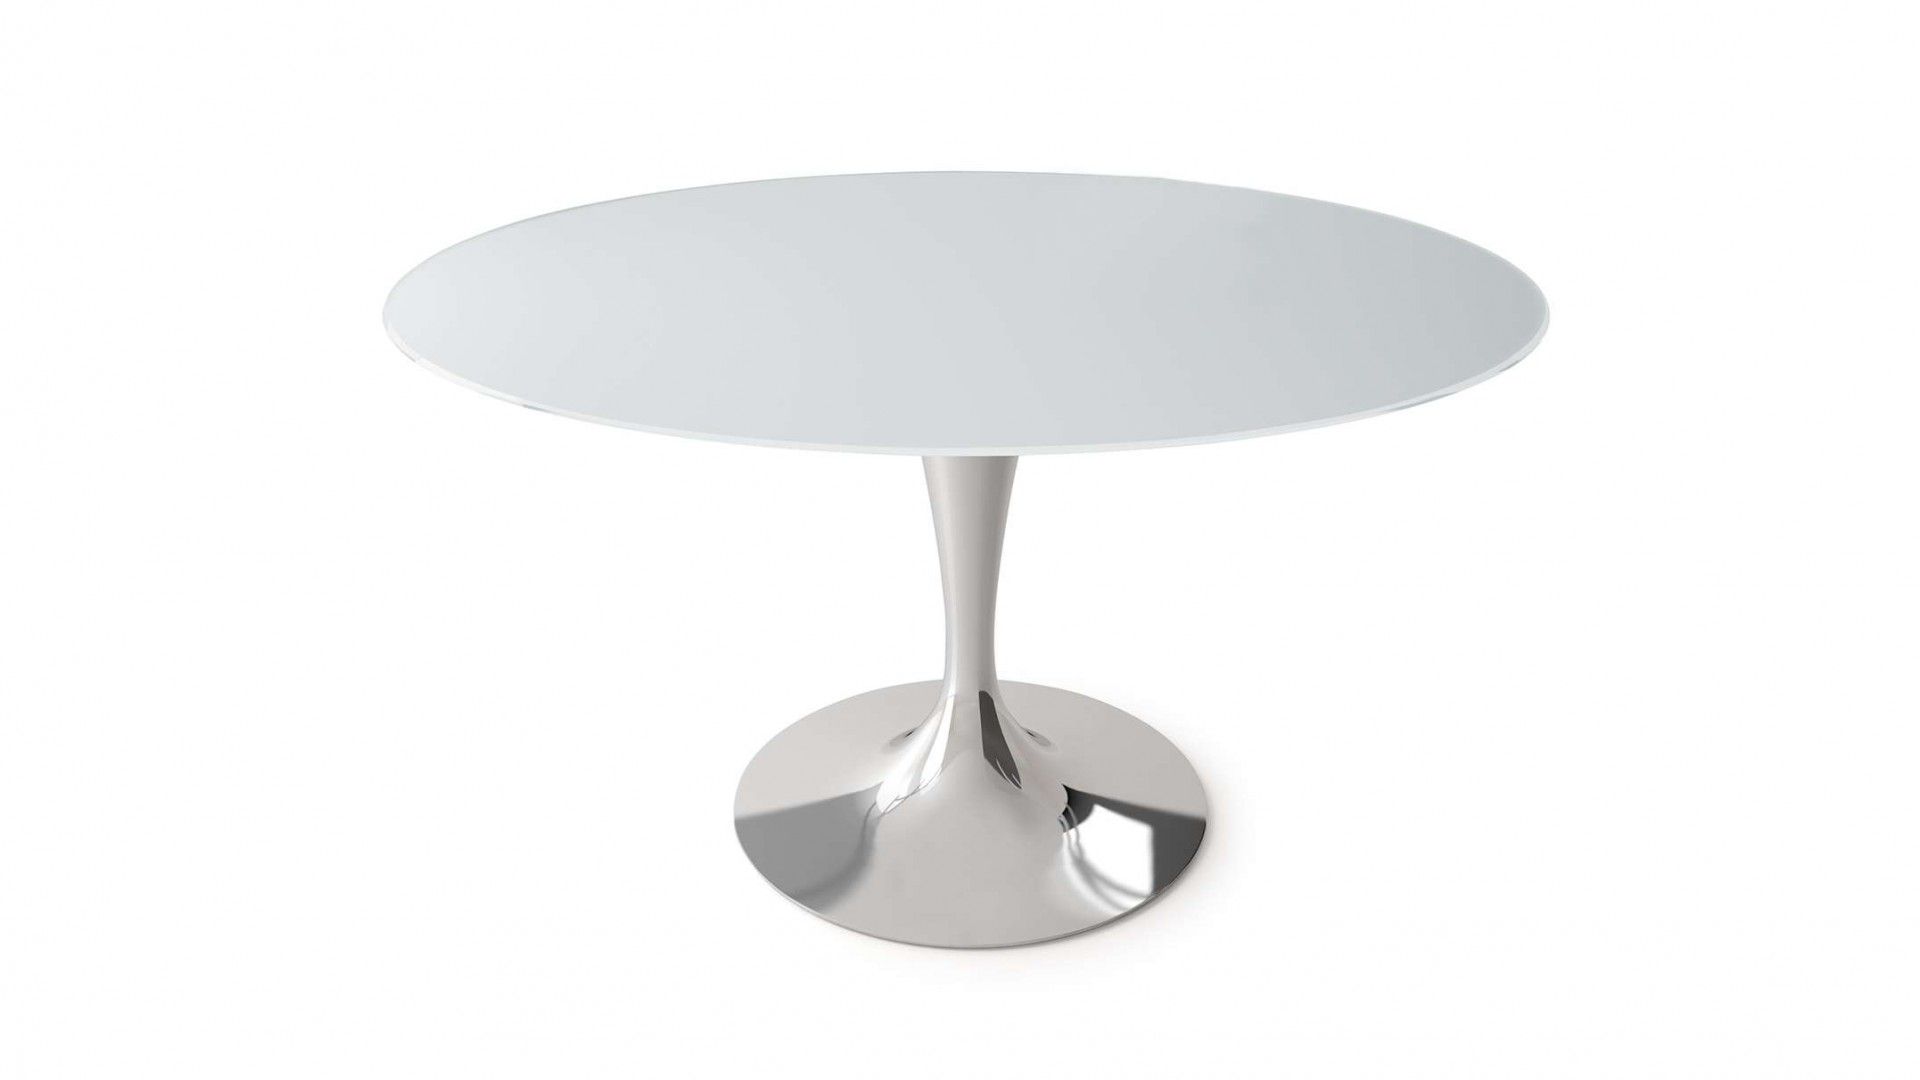 Table Sovet Flute Round Polished Chrome | Dexhom Throughout Polished Chrome Round Console Tables (View 9 of 20)